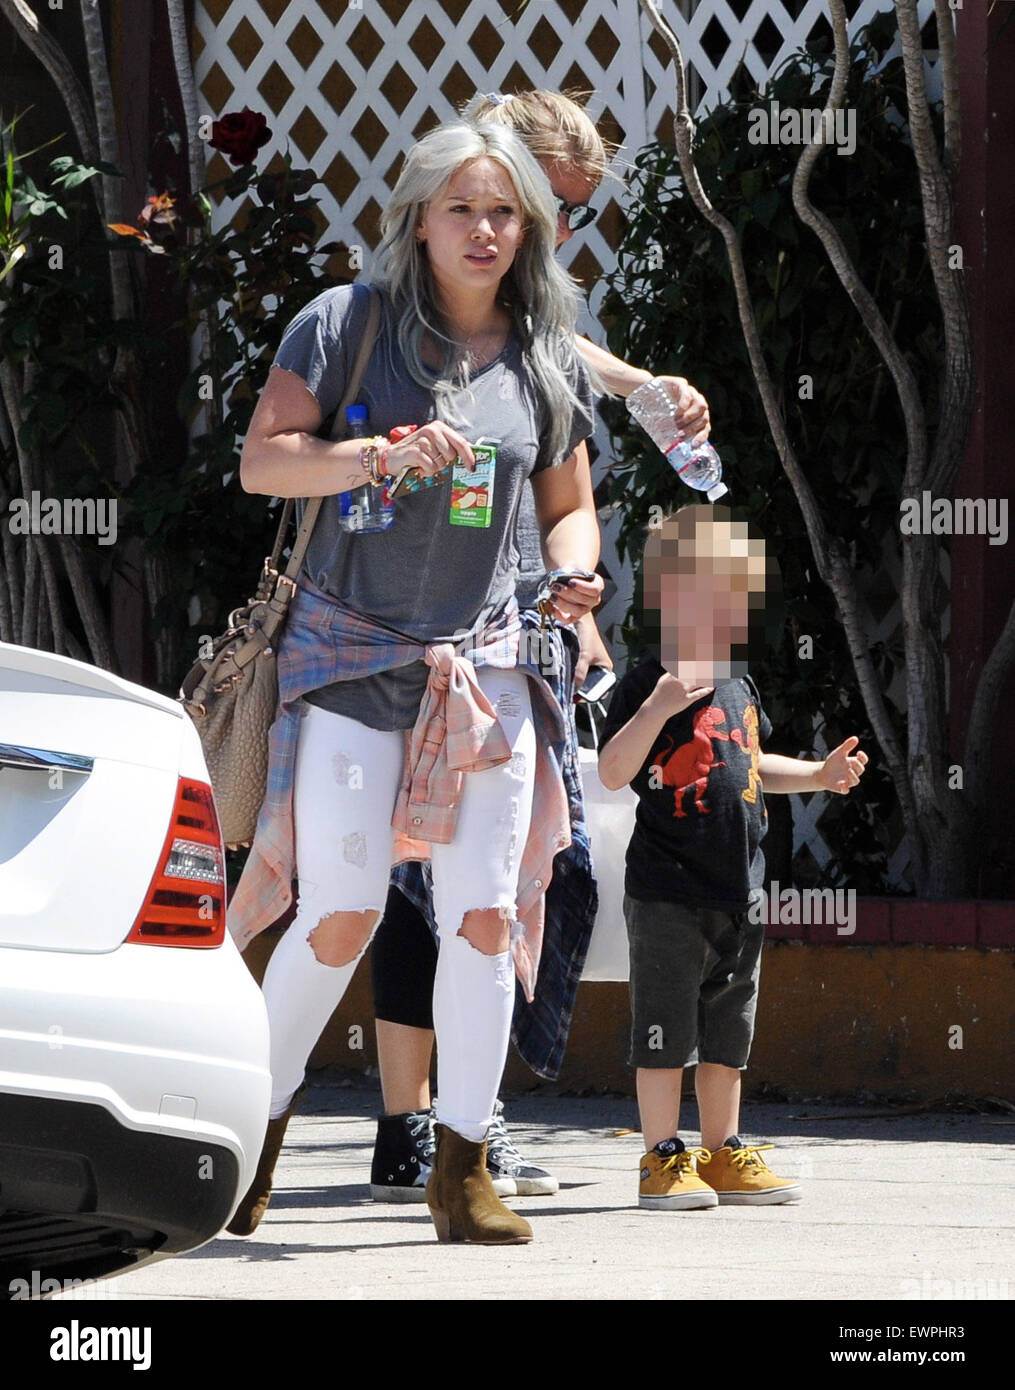 Hilary Duff still sporting her dyed hair, takes her son Luca to The Co-op in Studio City as he was cooled down on a hot spring day, getting sprinkled with bottled water by his nanny  Featuring: Hilary Duff, Luca Comrie Where: Los Angeles, California, United States When: 28 Apr 2015 C Stock Photo